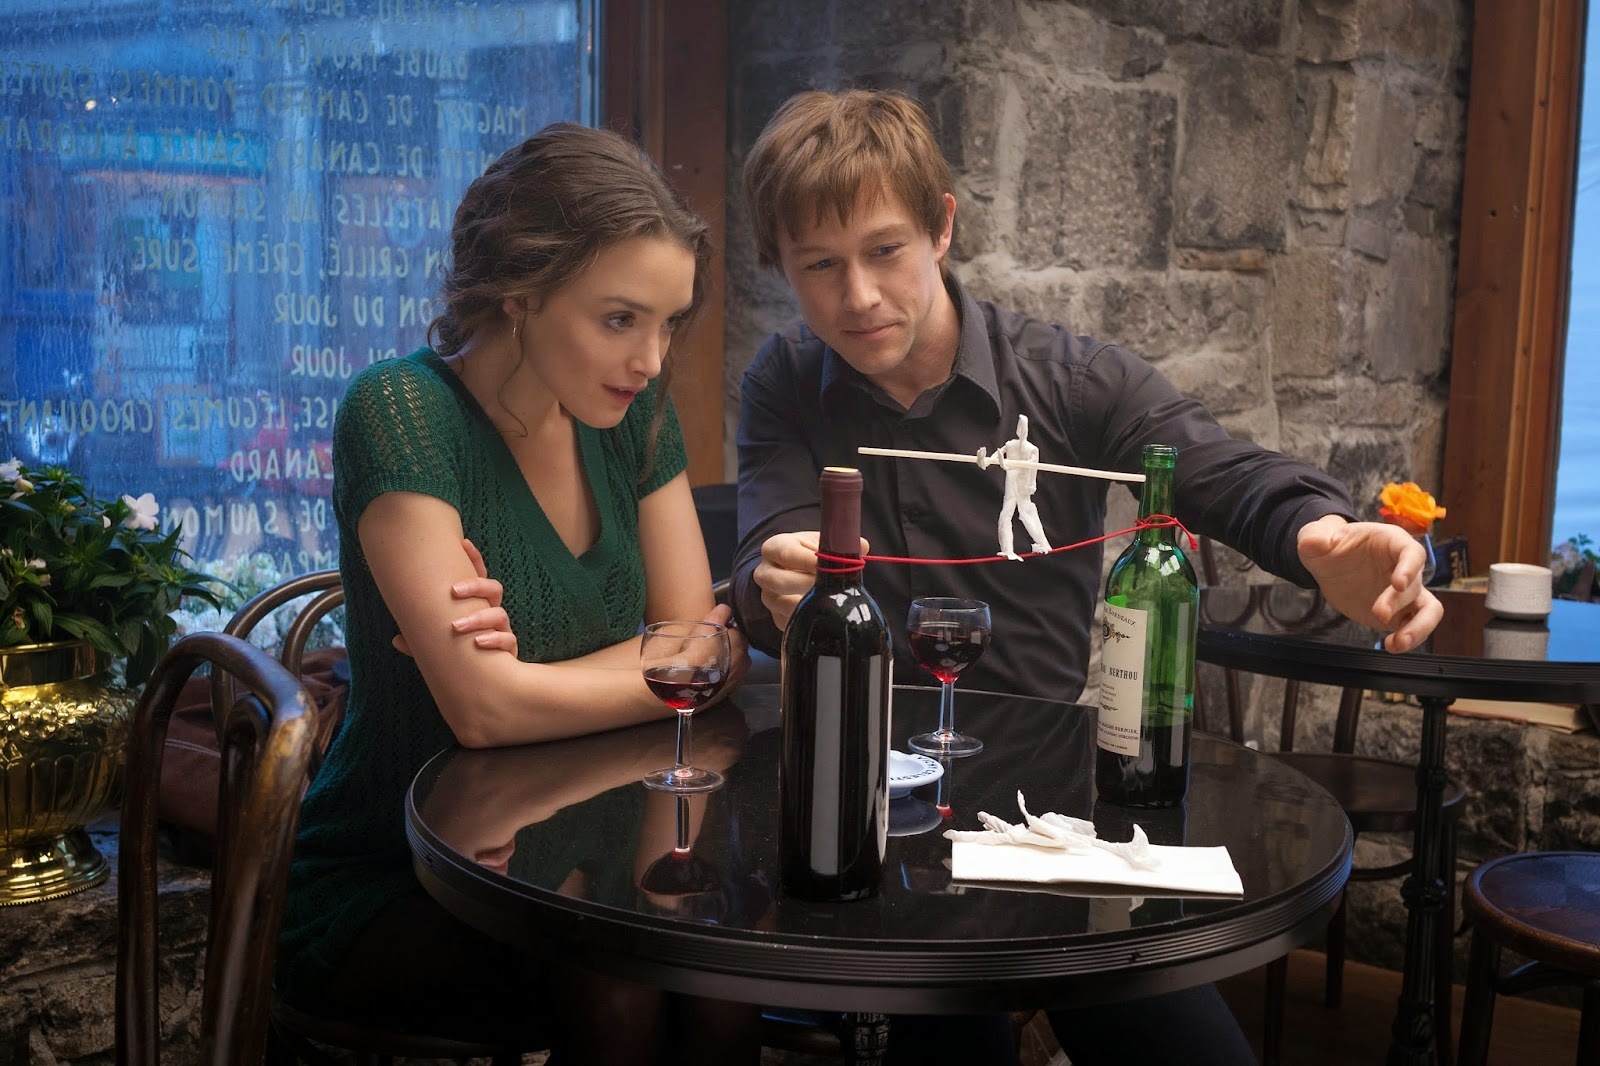 Petit (Joseph Gordon-Levitt) showing Annie (Charlotte Le Bon) his plan to walk between the two towers in New York City.